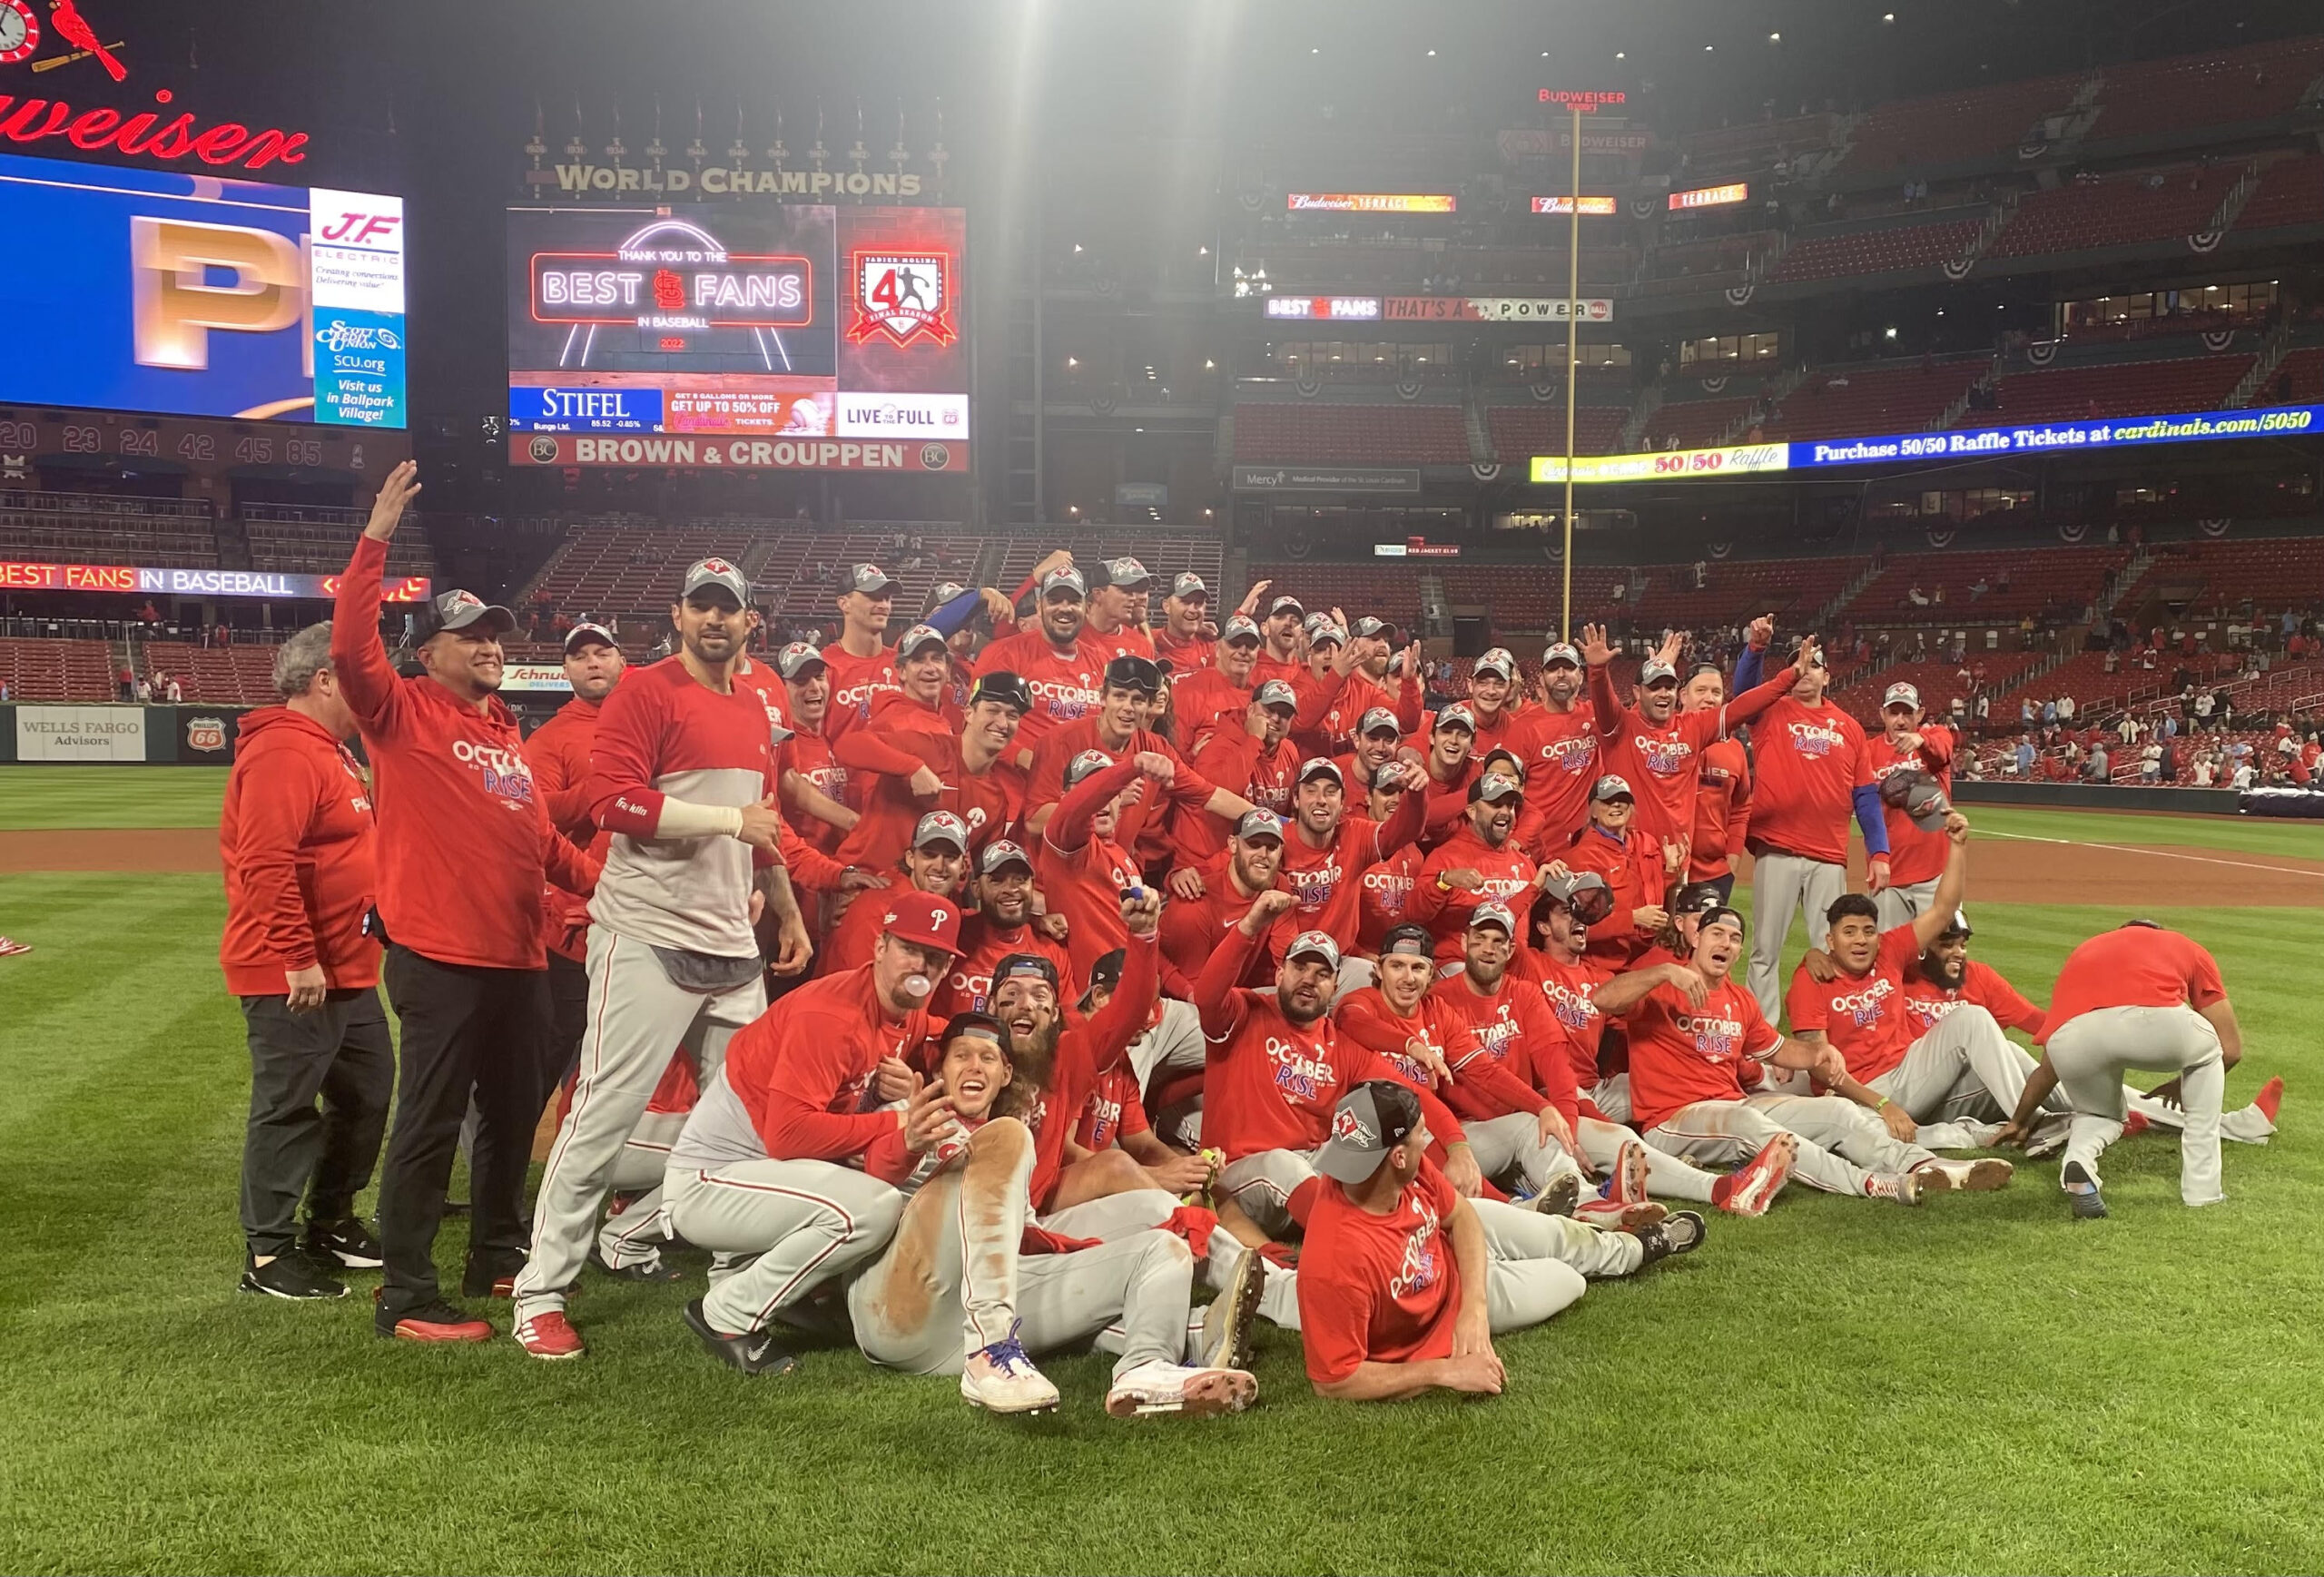 Phillies excited to bring Red October back to Philly  Phillies Nation -  Your source for Philadelphia Phillies news, opinion, history, rumors,  events, and other fun stuff.